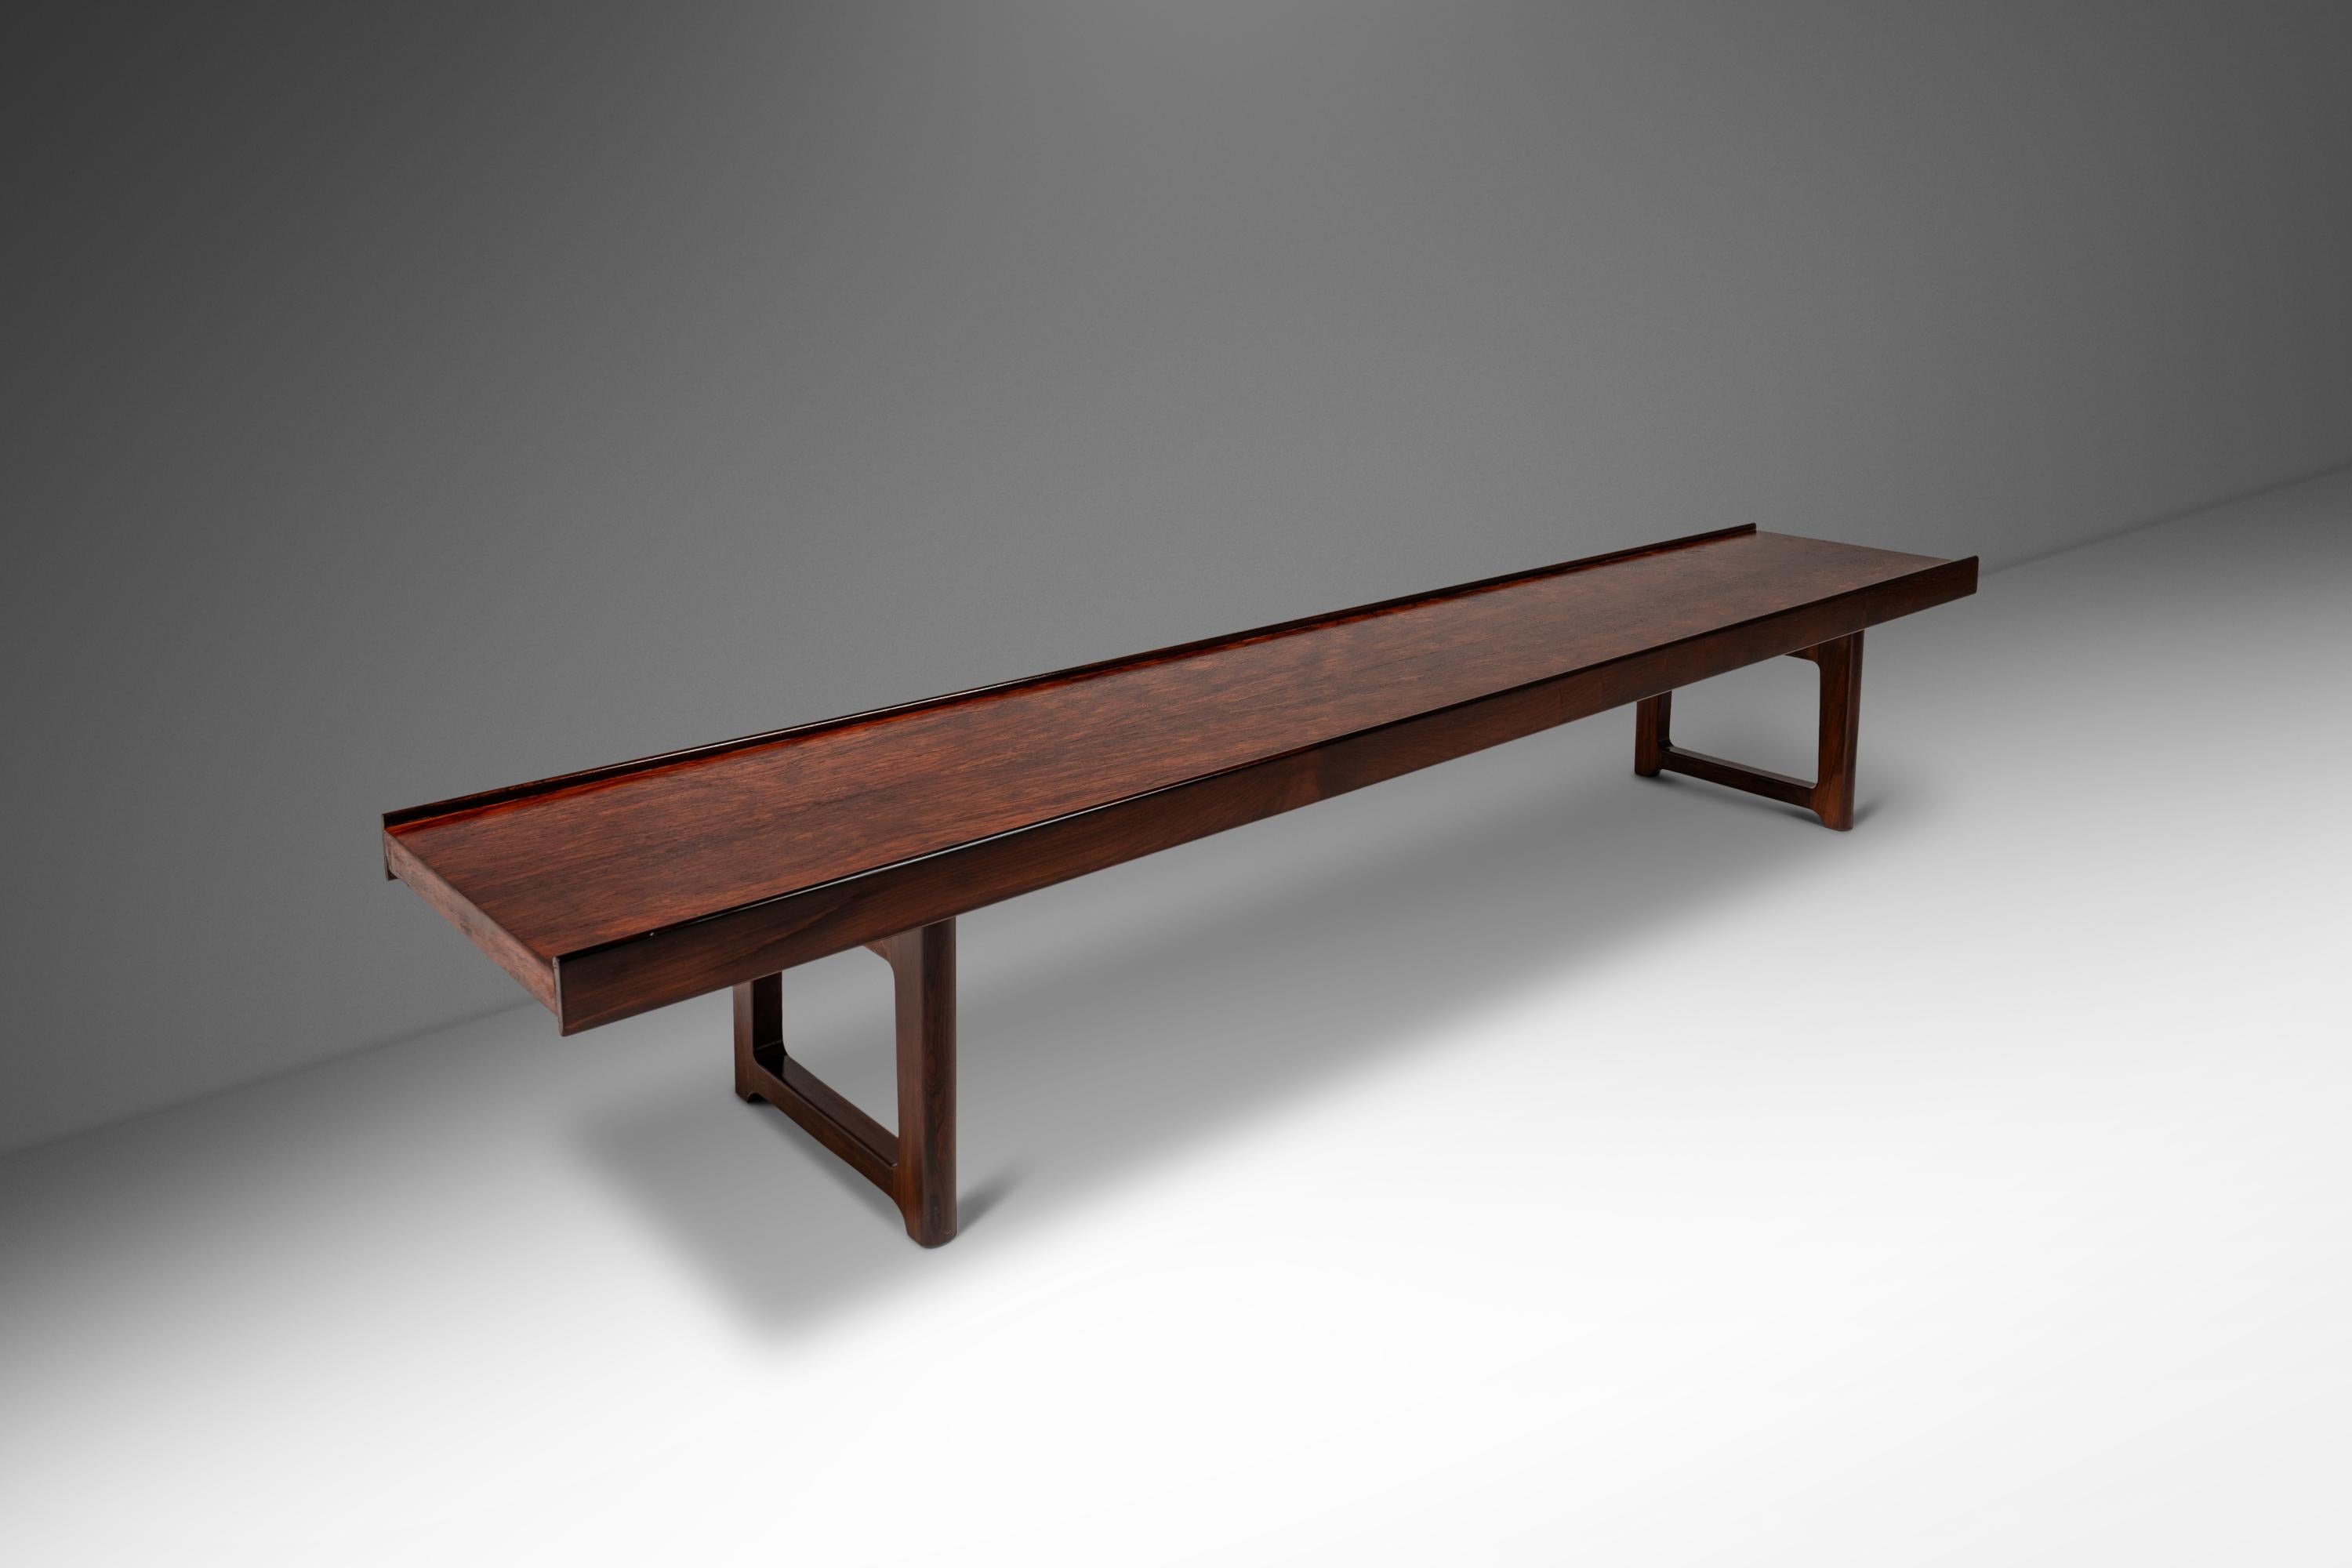 Introducing a rare, fully restored long “Krobo” bench designed by the influential Torbjørn Afdal for Bruksbo. Constructed from a mix of solid and veneered Brazilian rosewood with stunning variegated woodgrains unique to the species this bench